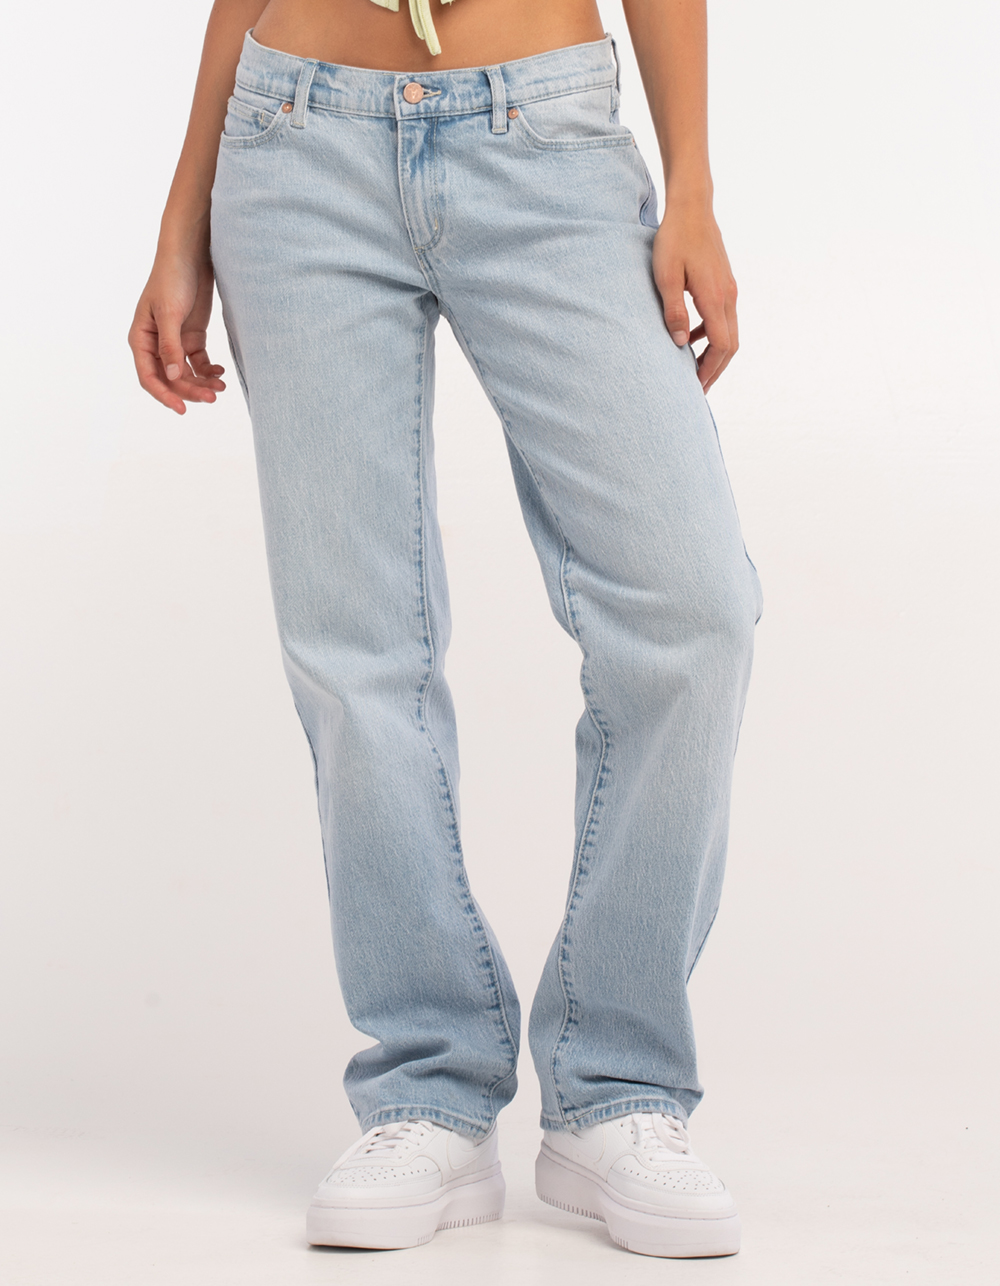 ABRAND A 99 Low Womens Straight Jeans - LIGHT WASH | Tillys